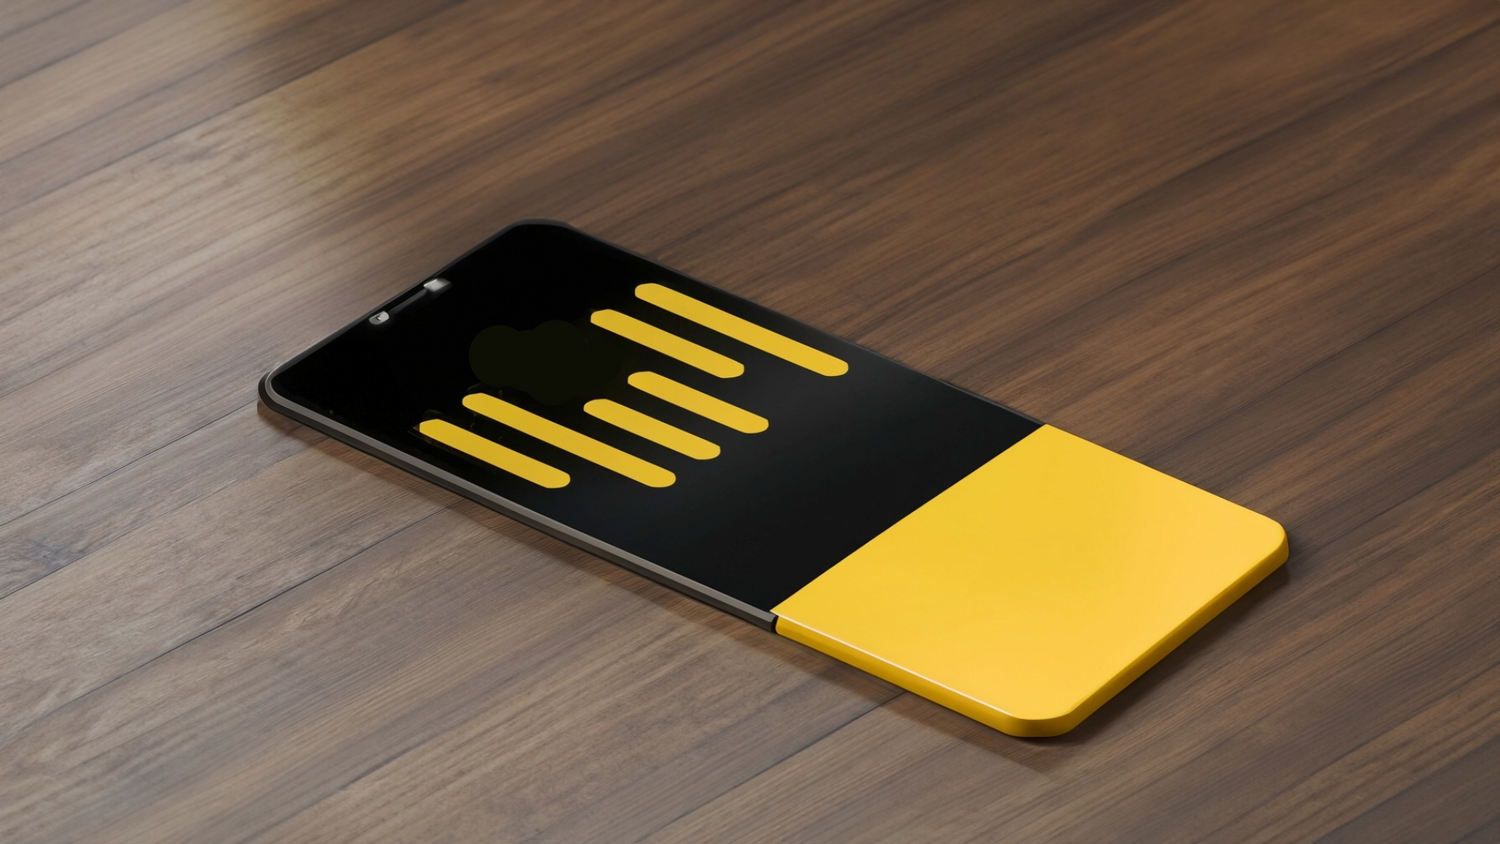 A smartphone with a conceptual interface design on it